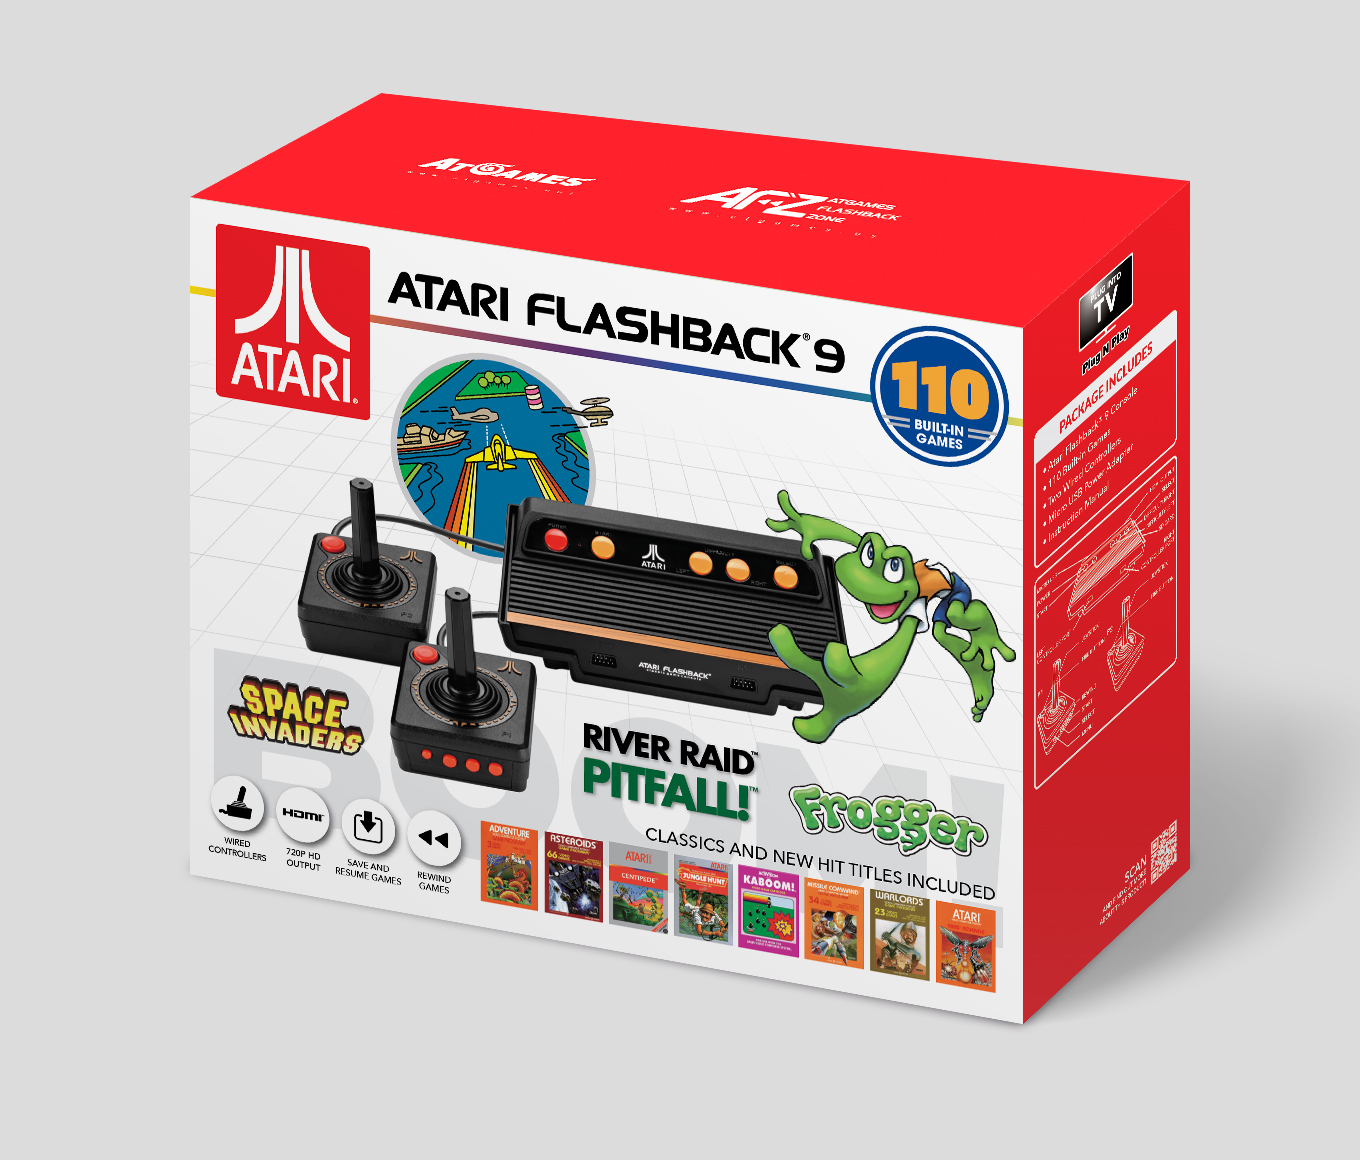 Atari Flashback 9, HDMI Game Consoles, 110 Games, Wired Joystick Controllers, Black, AR3050 - image 2 of 7